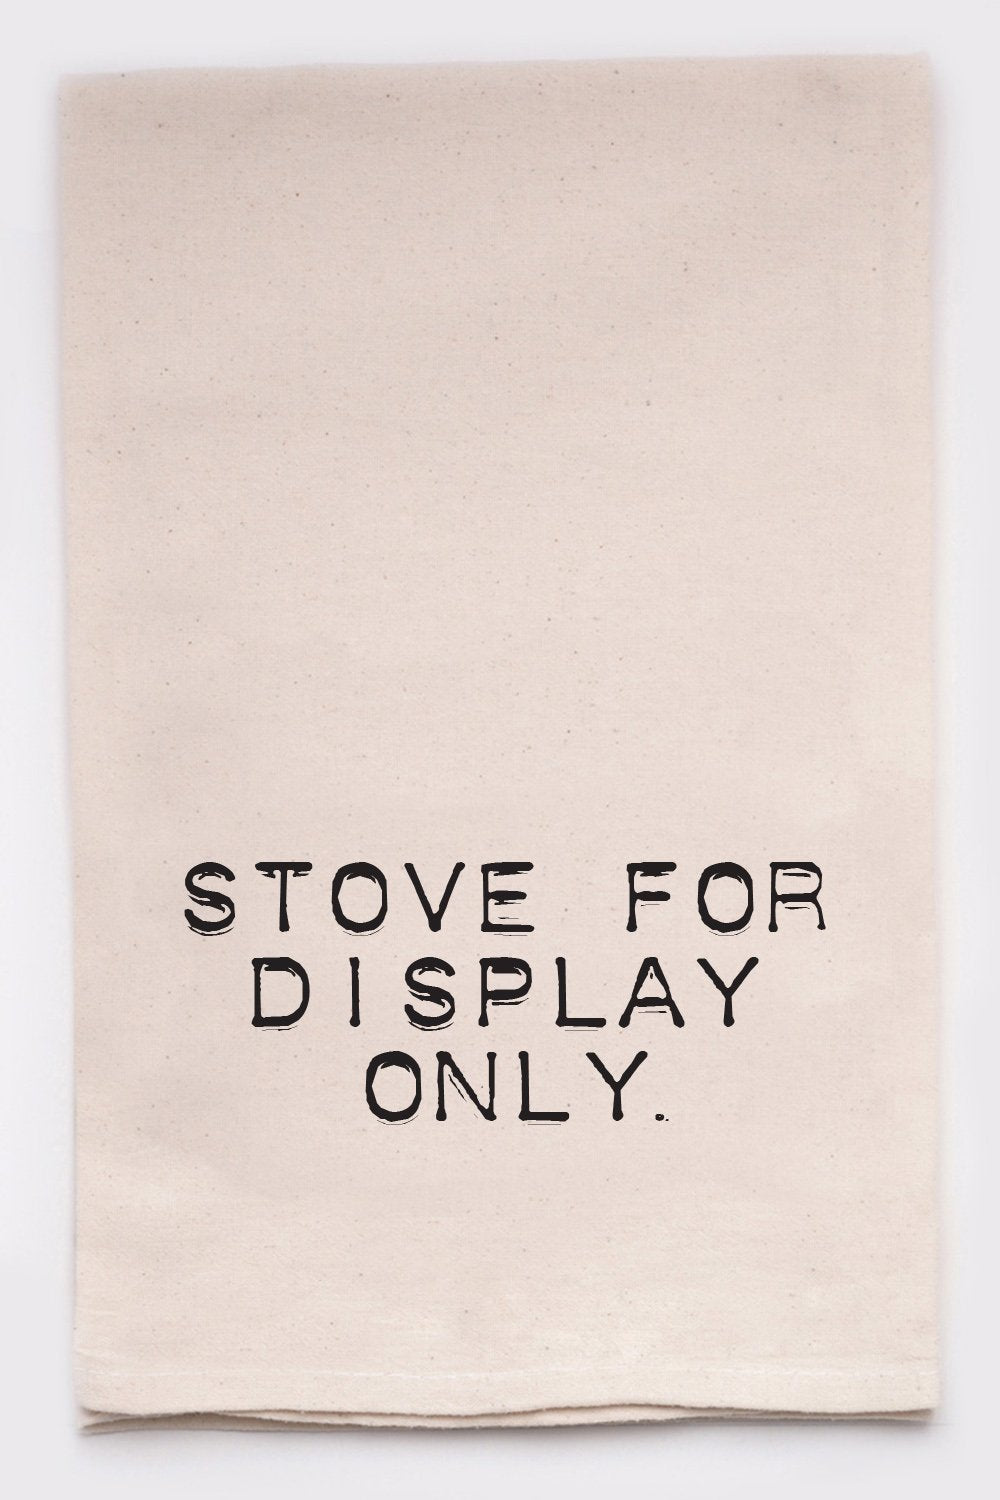 Stove for display only dish towel